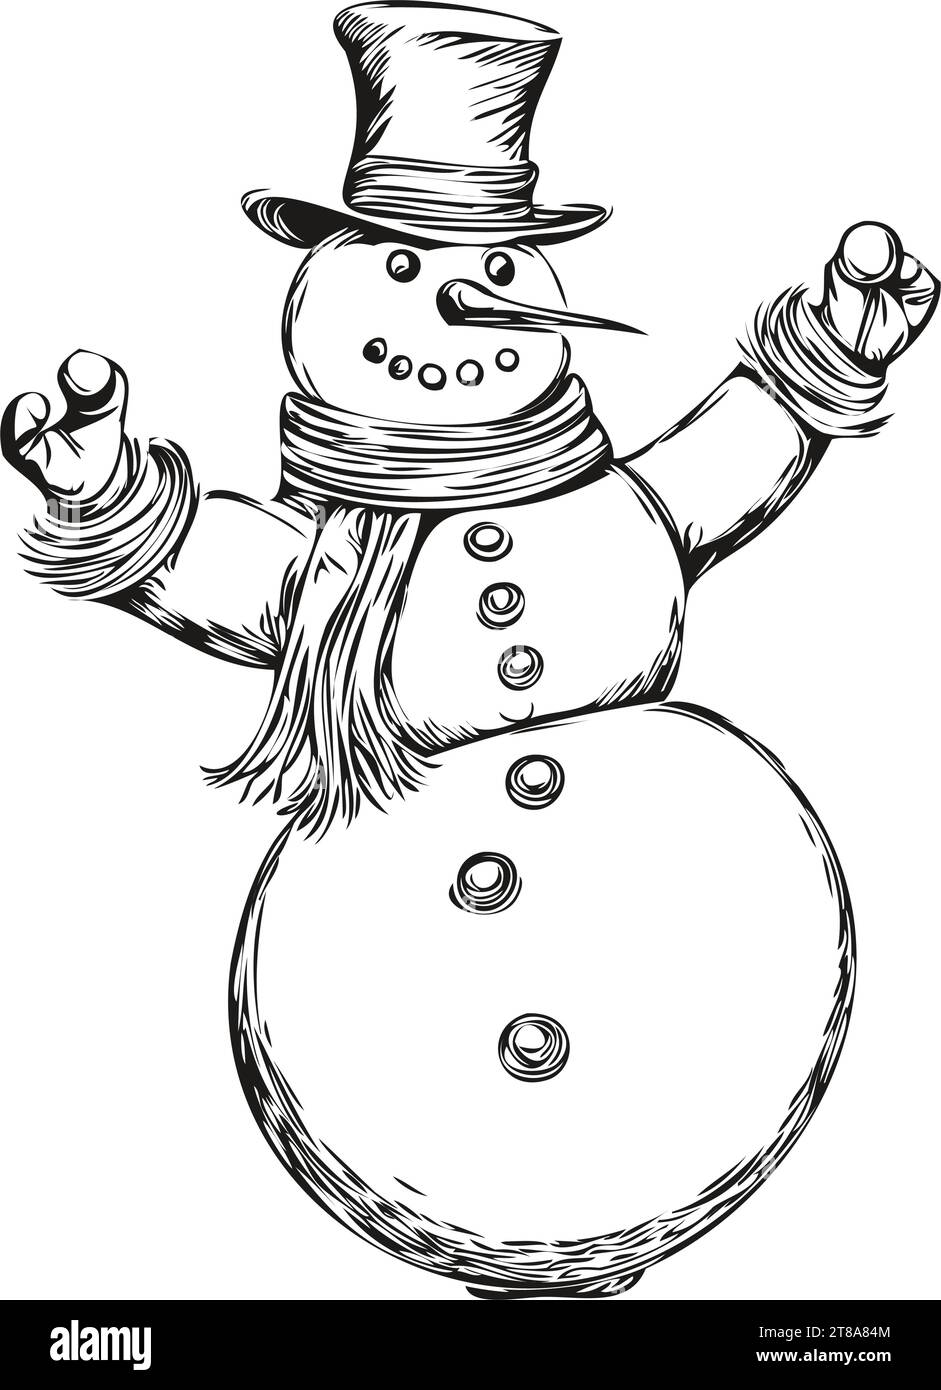 Snowman Sketch in Ink Detailed Hand Drawn Christmas Snowman Illustration with Vintage Style and Holiday Mood, black white isolated Vector ink outlines Stock Vector